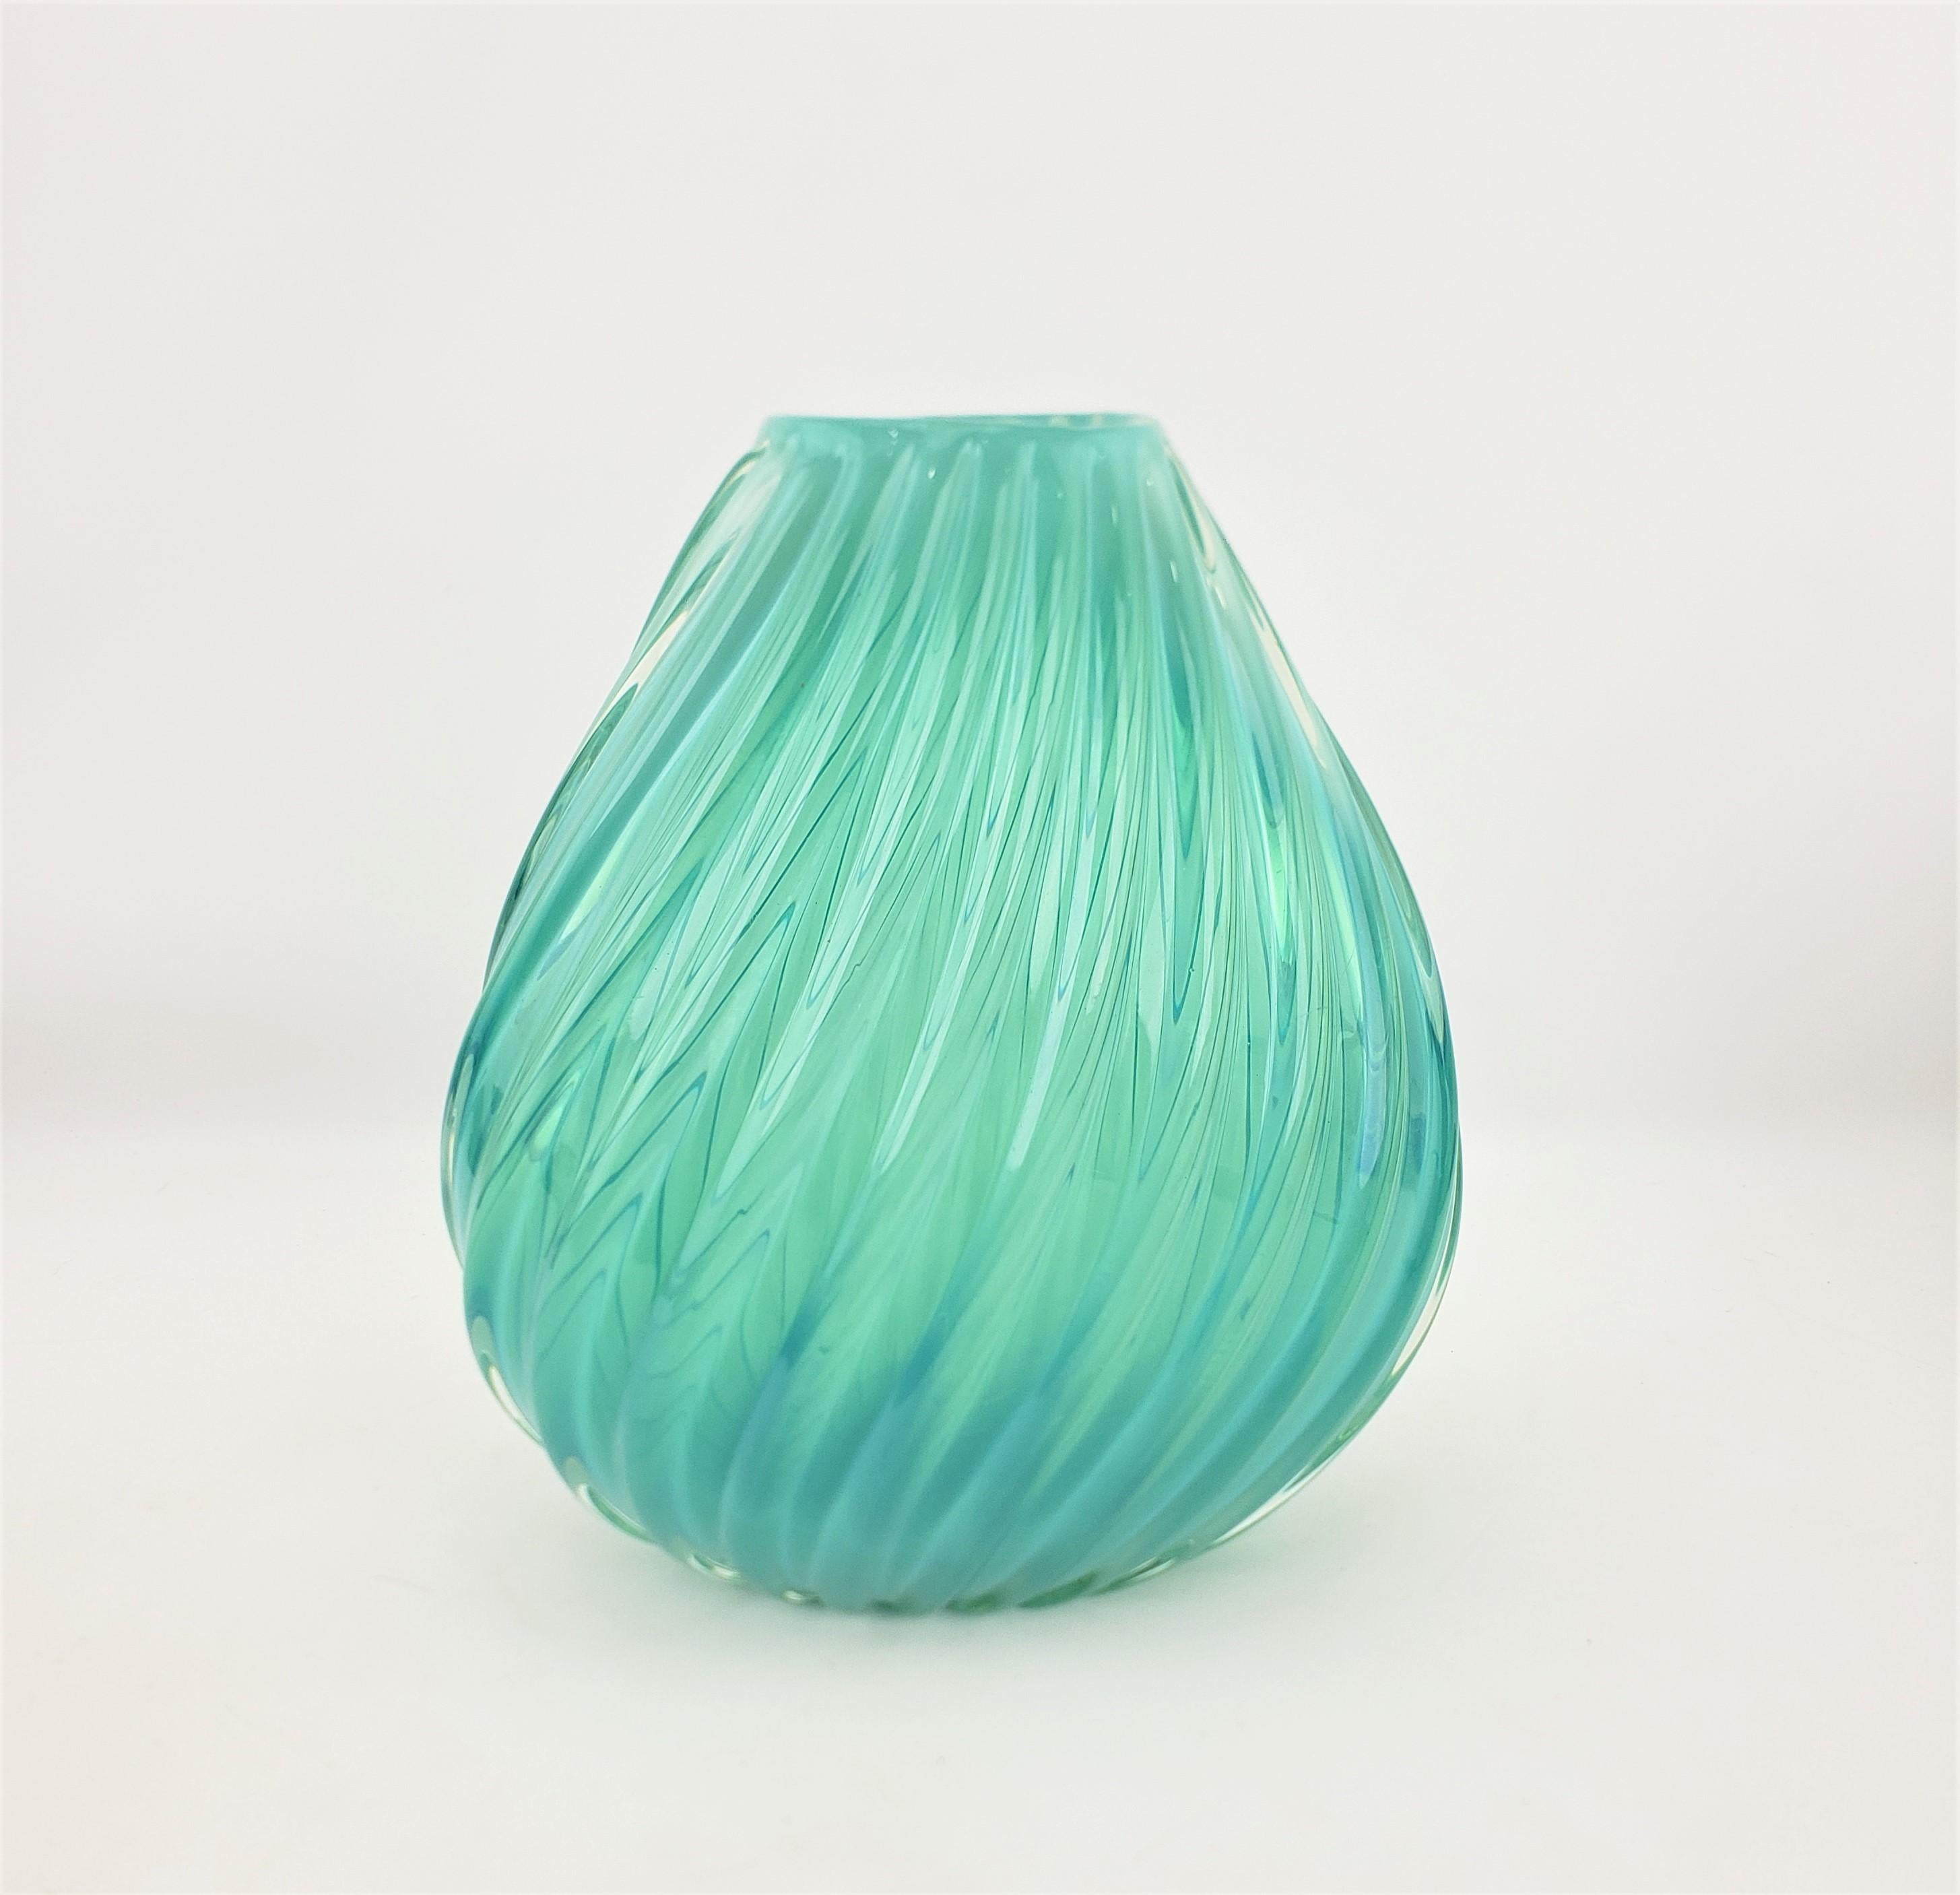 This Mid-Century art glass vase is unsigned, but presumed to have originated from Italy and dating to approximately 1965. This gourd shaped vase is done in a thick aquamarine glass with a swirled ribbing that runs from the top, down to the base.